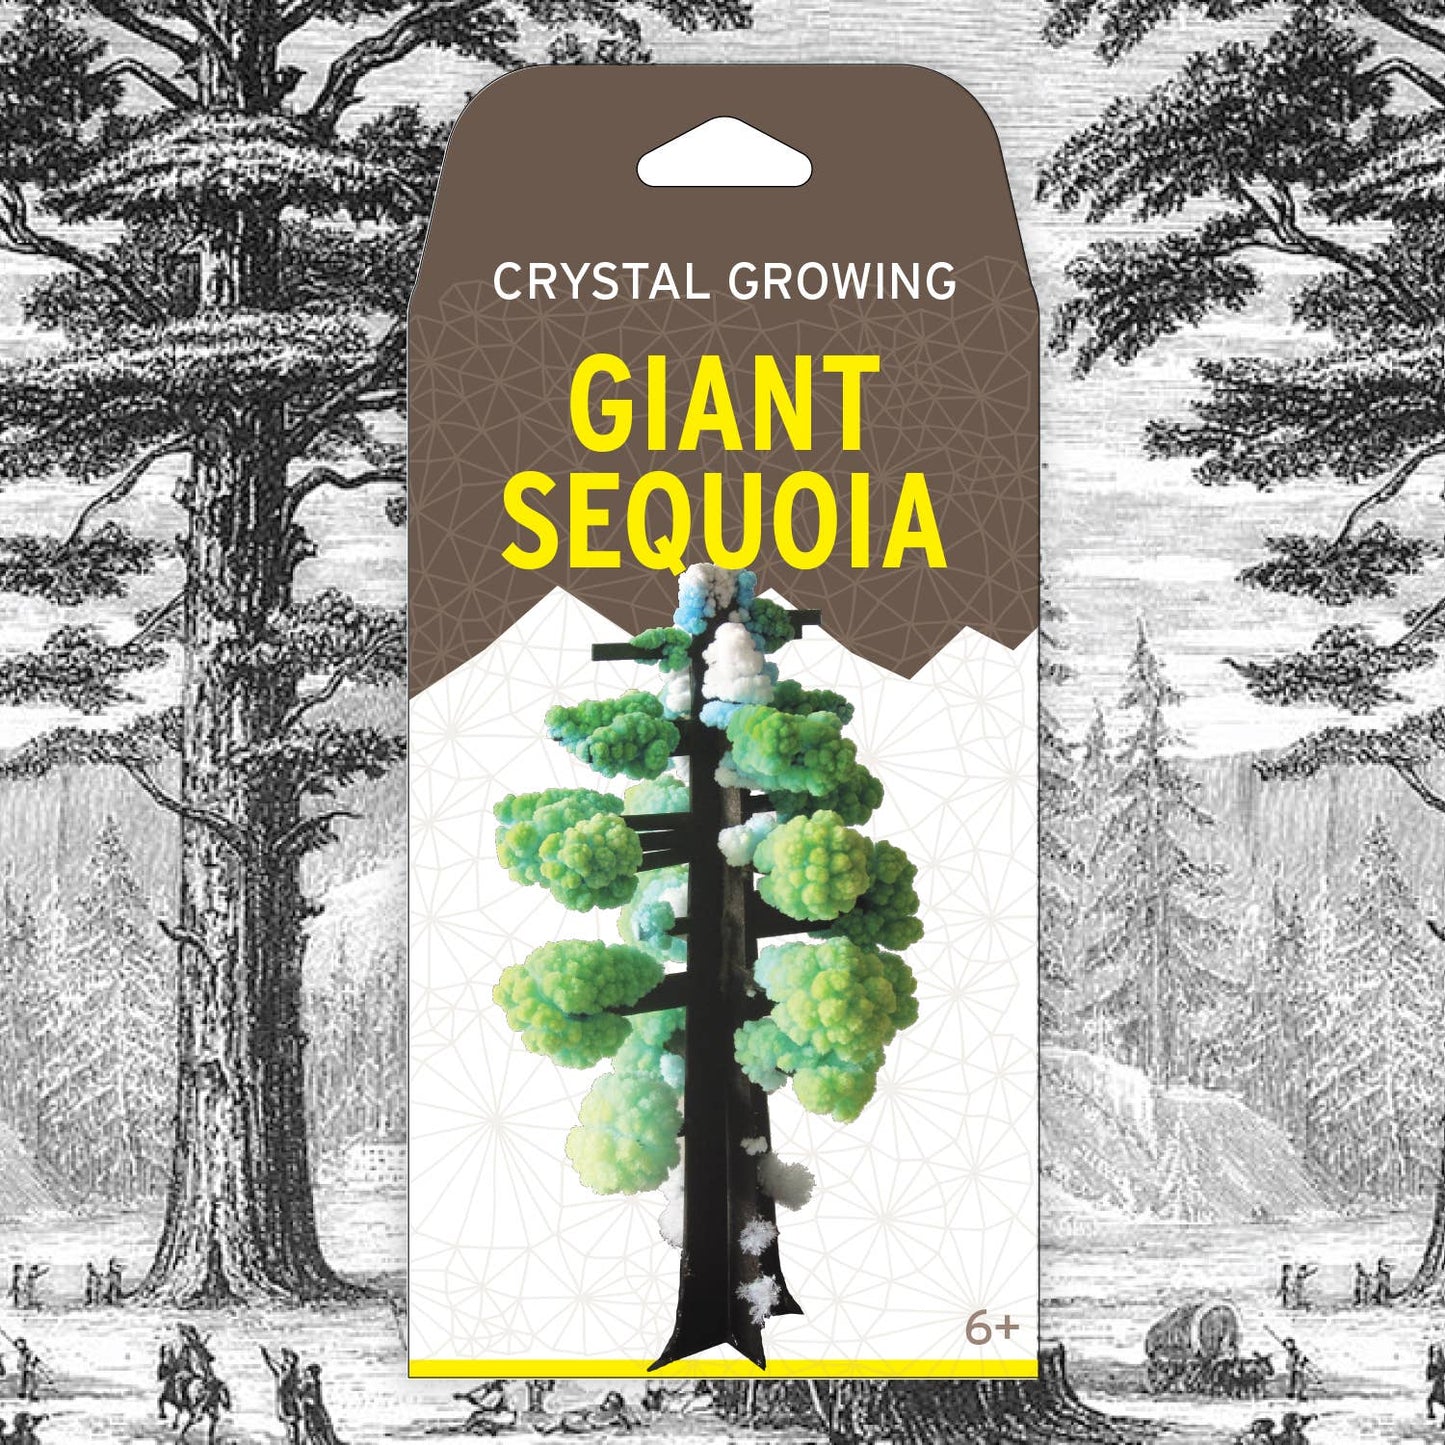 The packaging for a crystal growing science kit that makes a sequoia tree. Good for ages 6+.